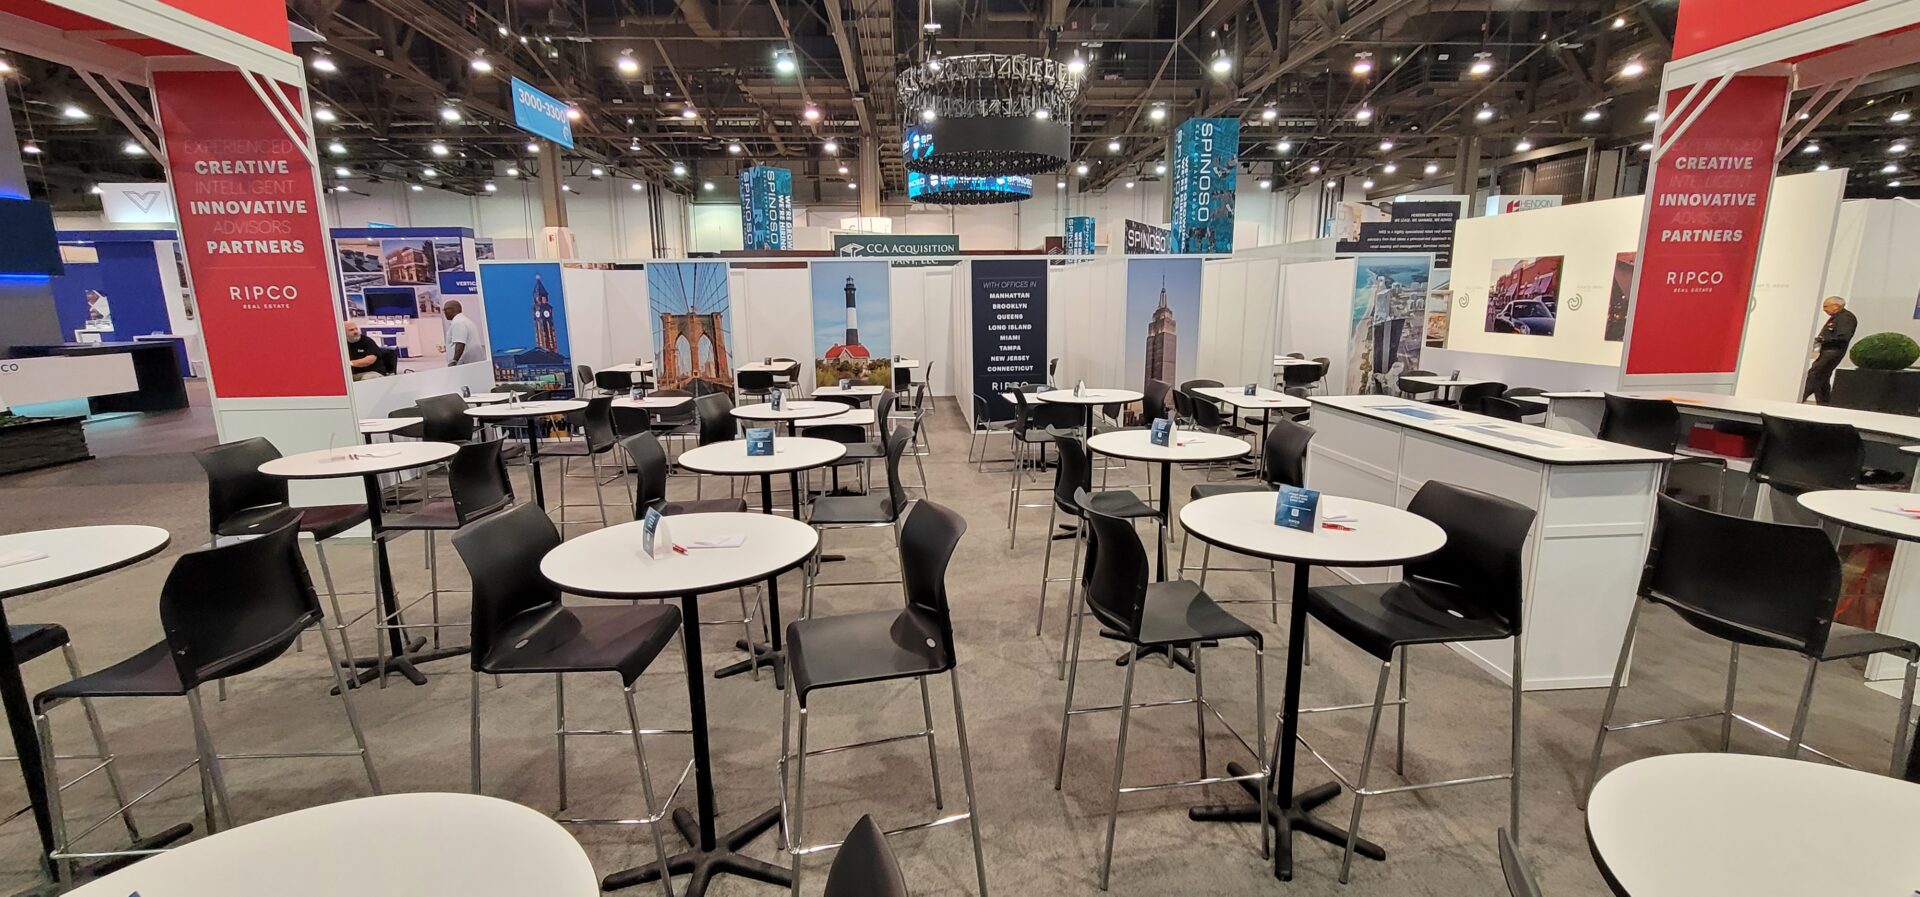 Multiple tables and chairs in an event